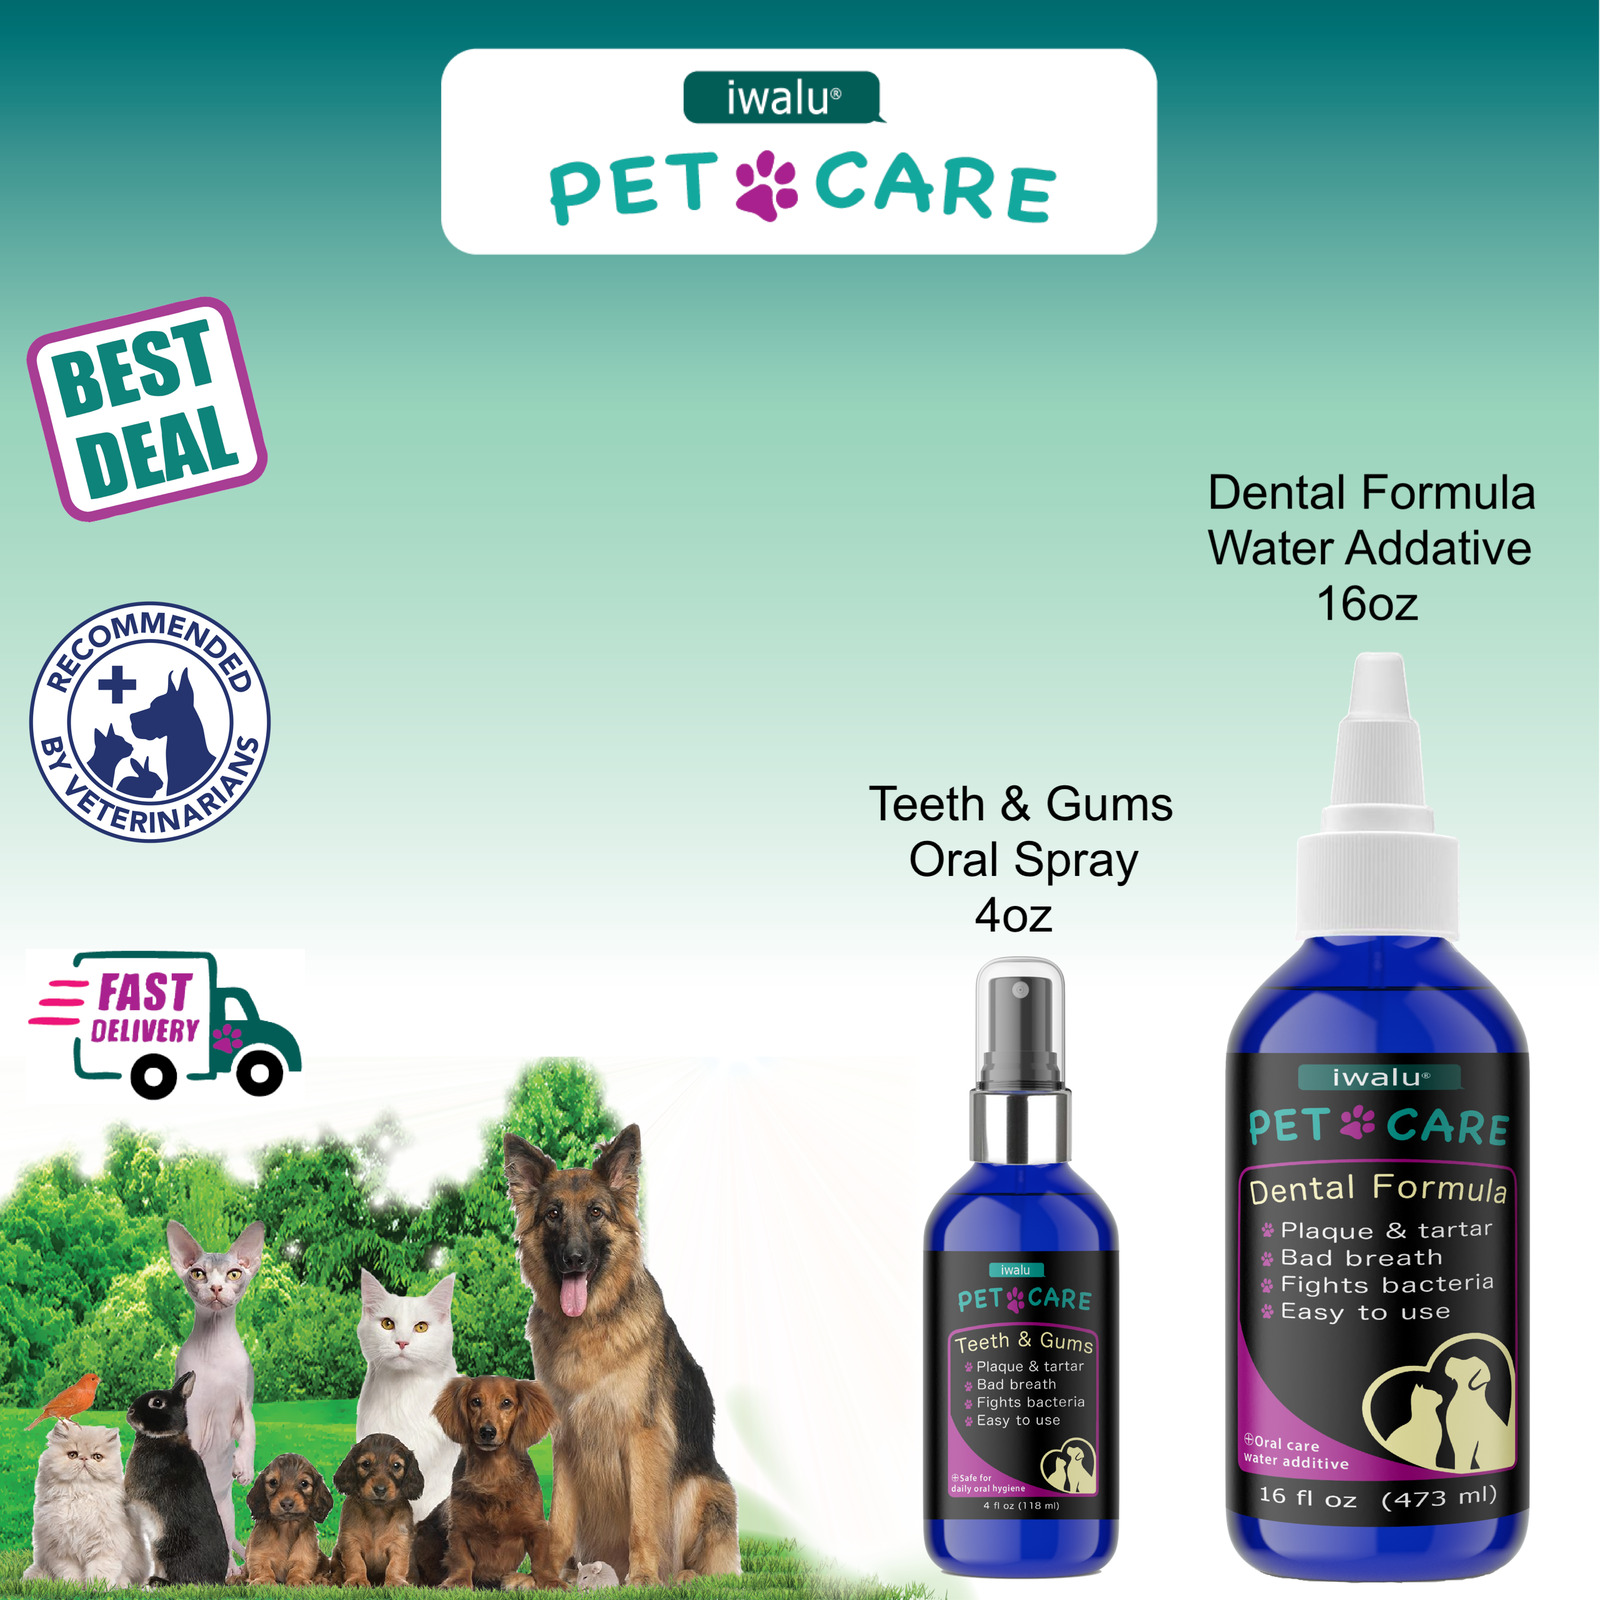 PET TEETH CLEANING Pet Supplies Bad Breath treatment Mouthwash Water Additive